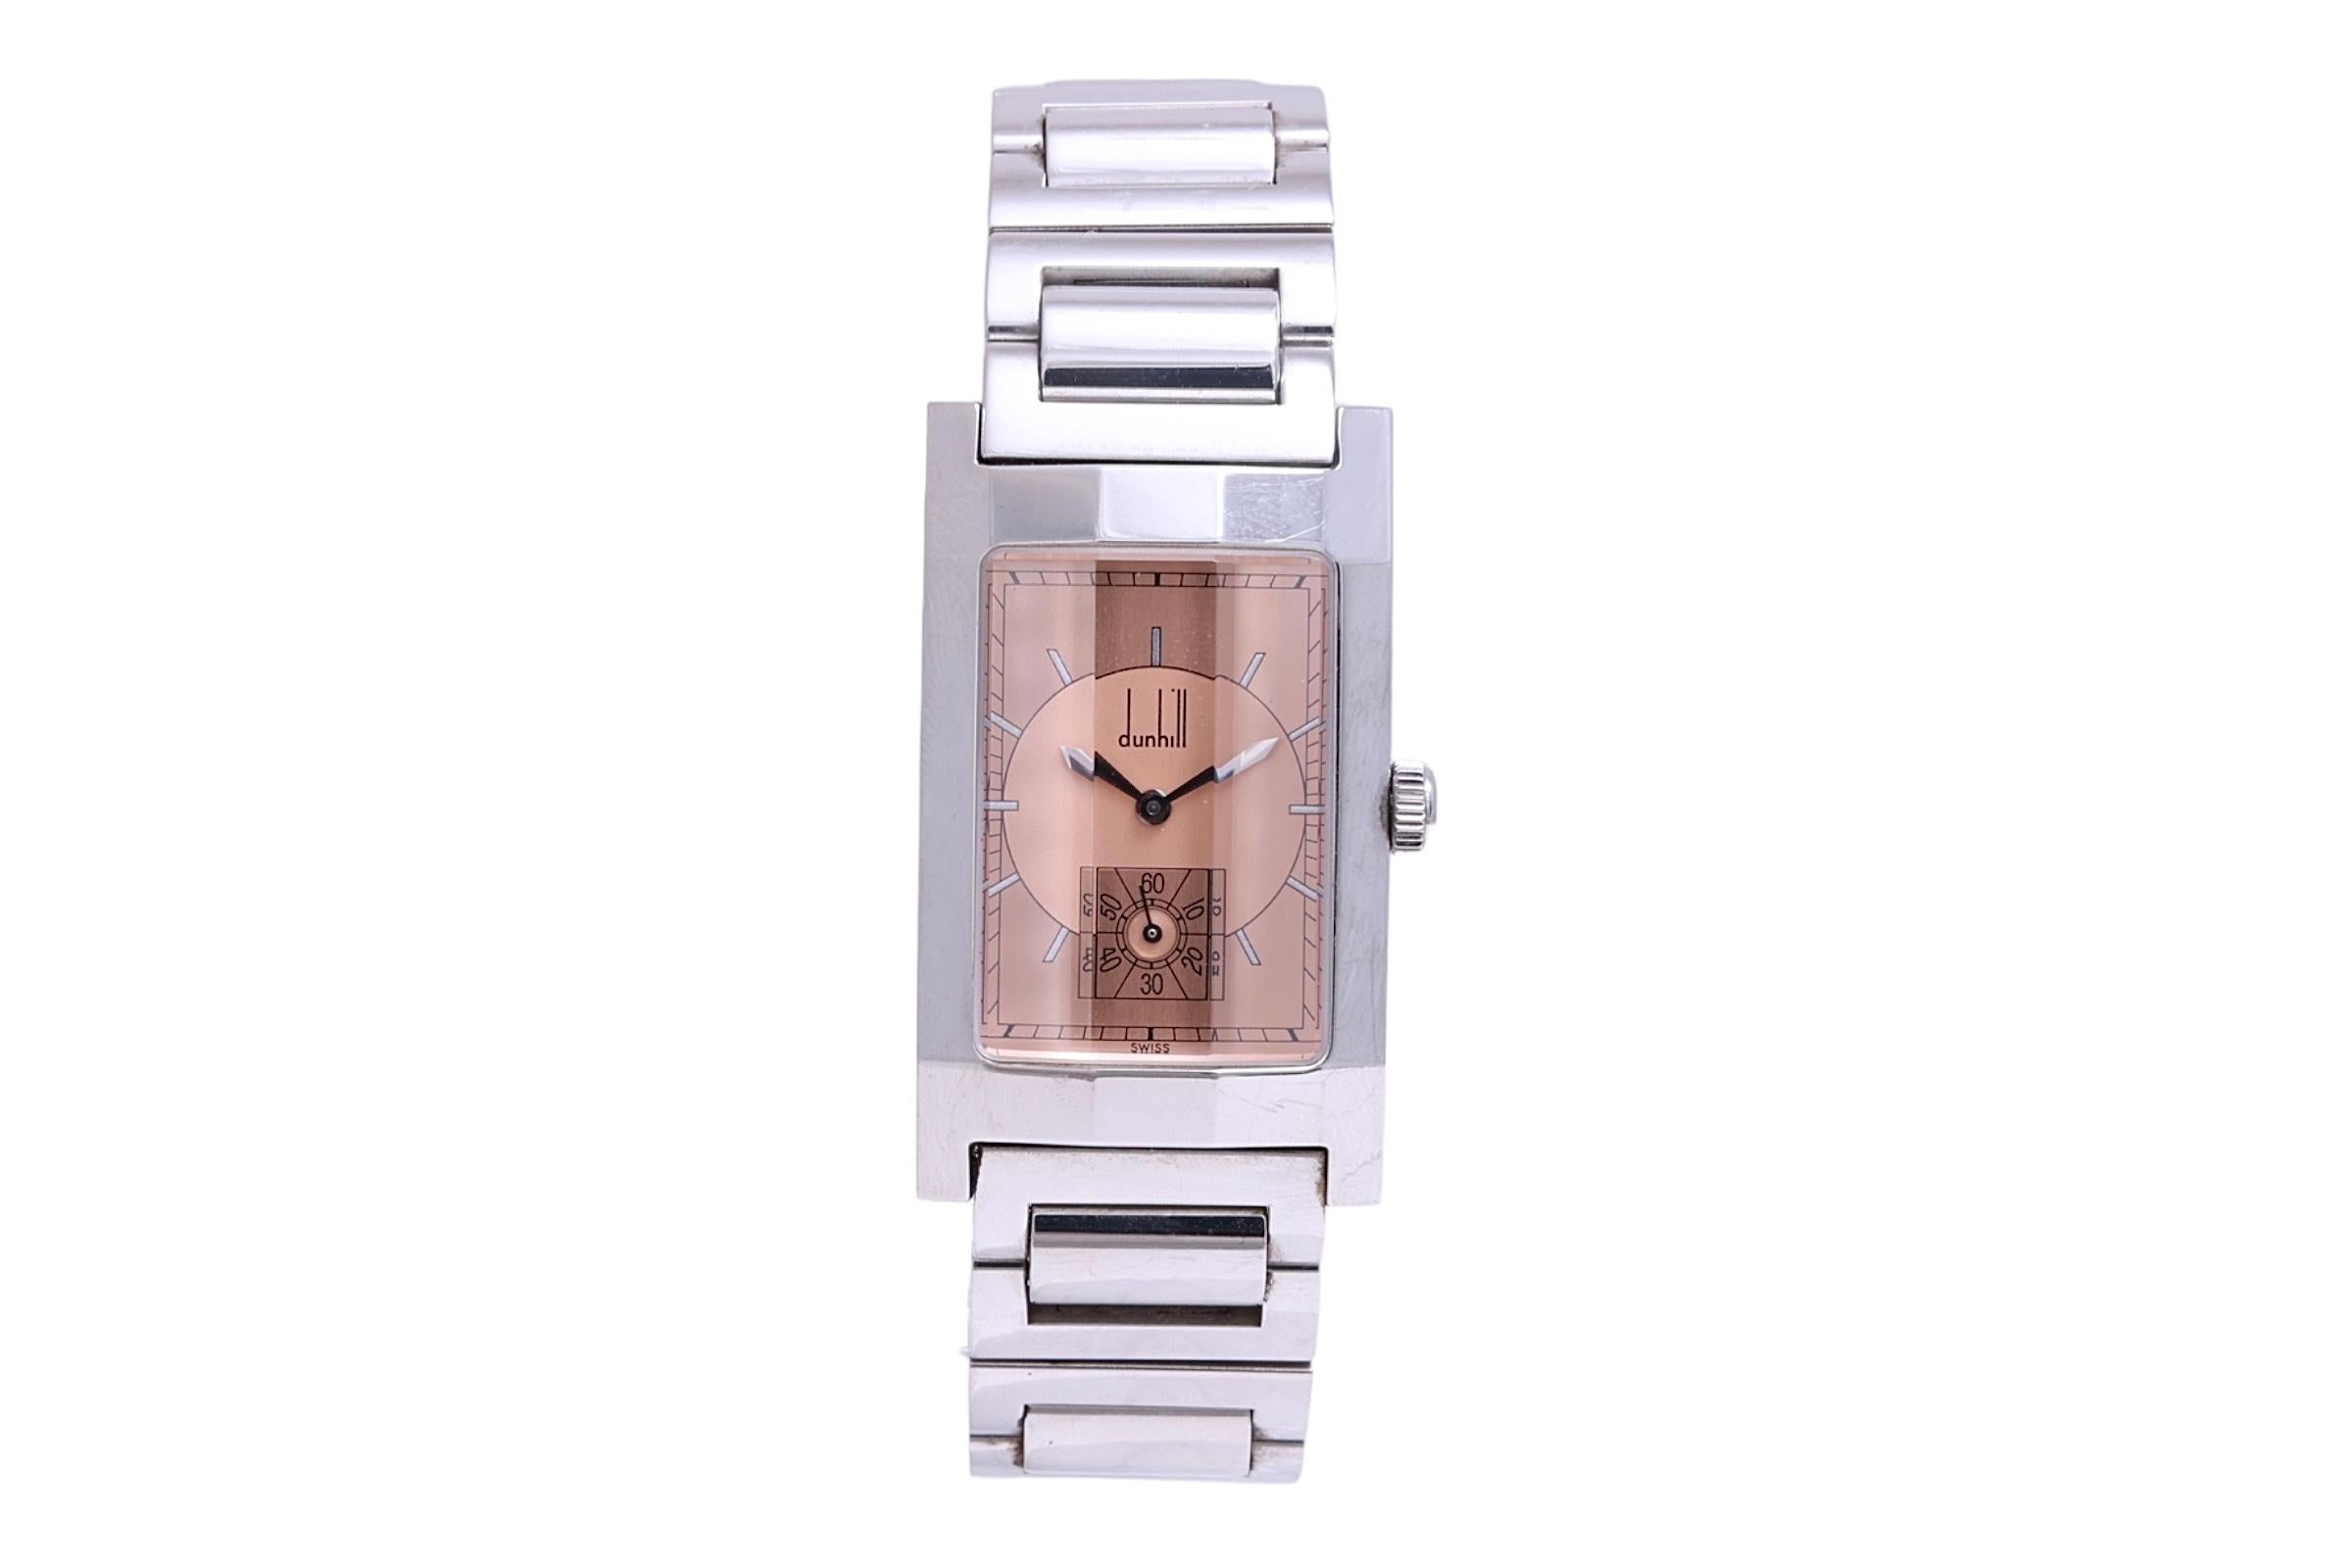 Stainless Steel Dunhill Facet Art Deco Style Wrist Watch with Box & Papers in beautiful Condition

Has a magnificent facetted glass like case !

Case & Strap : Stainless Steel ,Waterproof 30M, Will fit a 19 cm Wrist

Movement : Quartz

Dial : Salmon